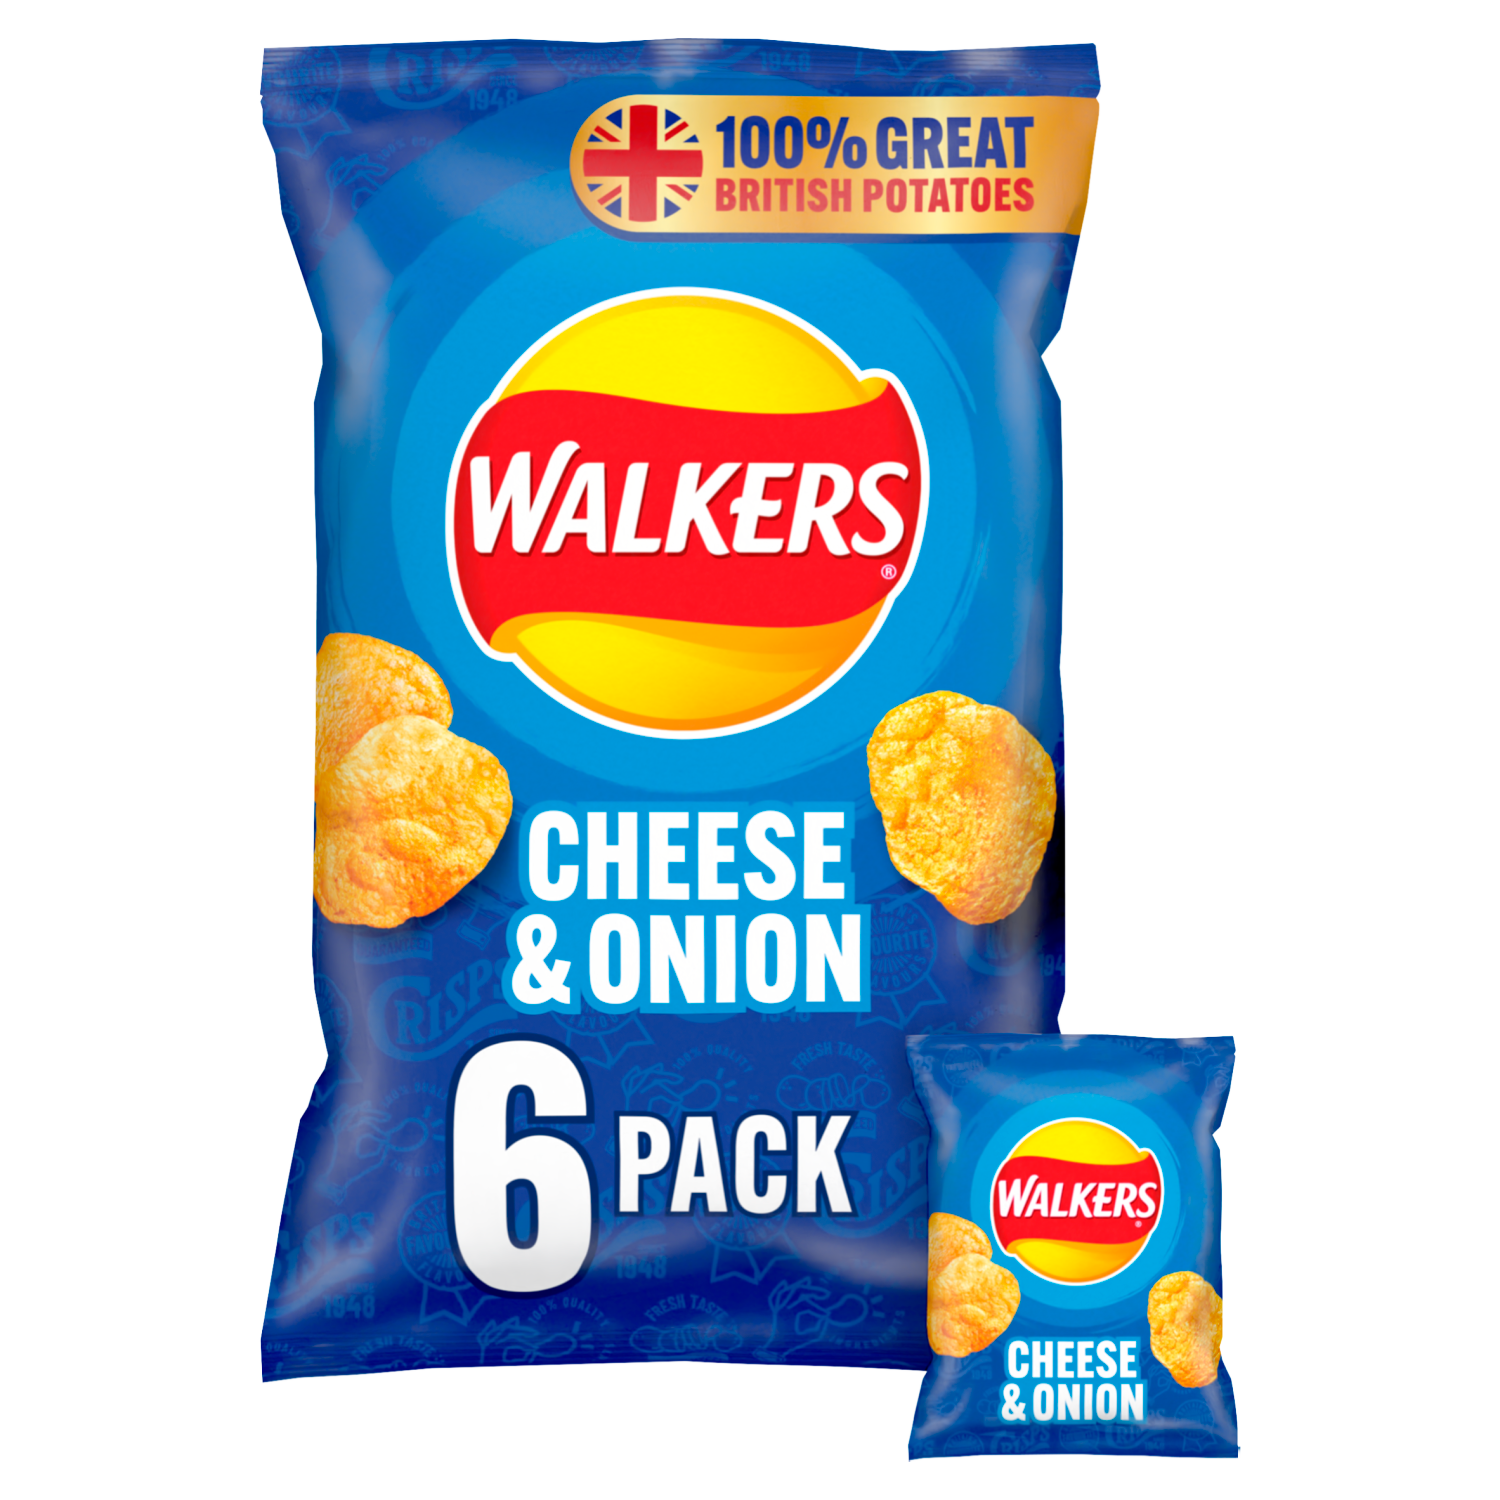 Walkers Crisps Chips Cheese & Onion 6-Pack / 6 x 25g